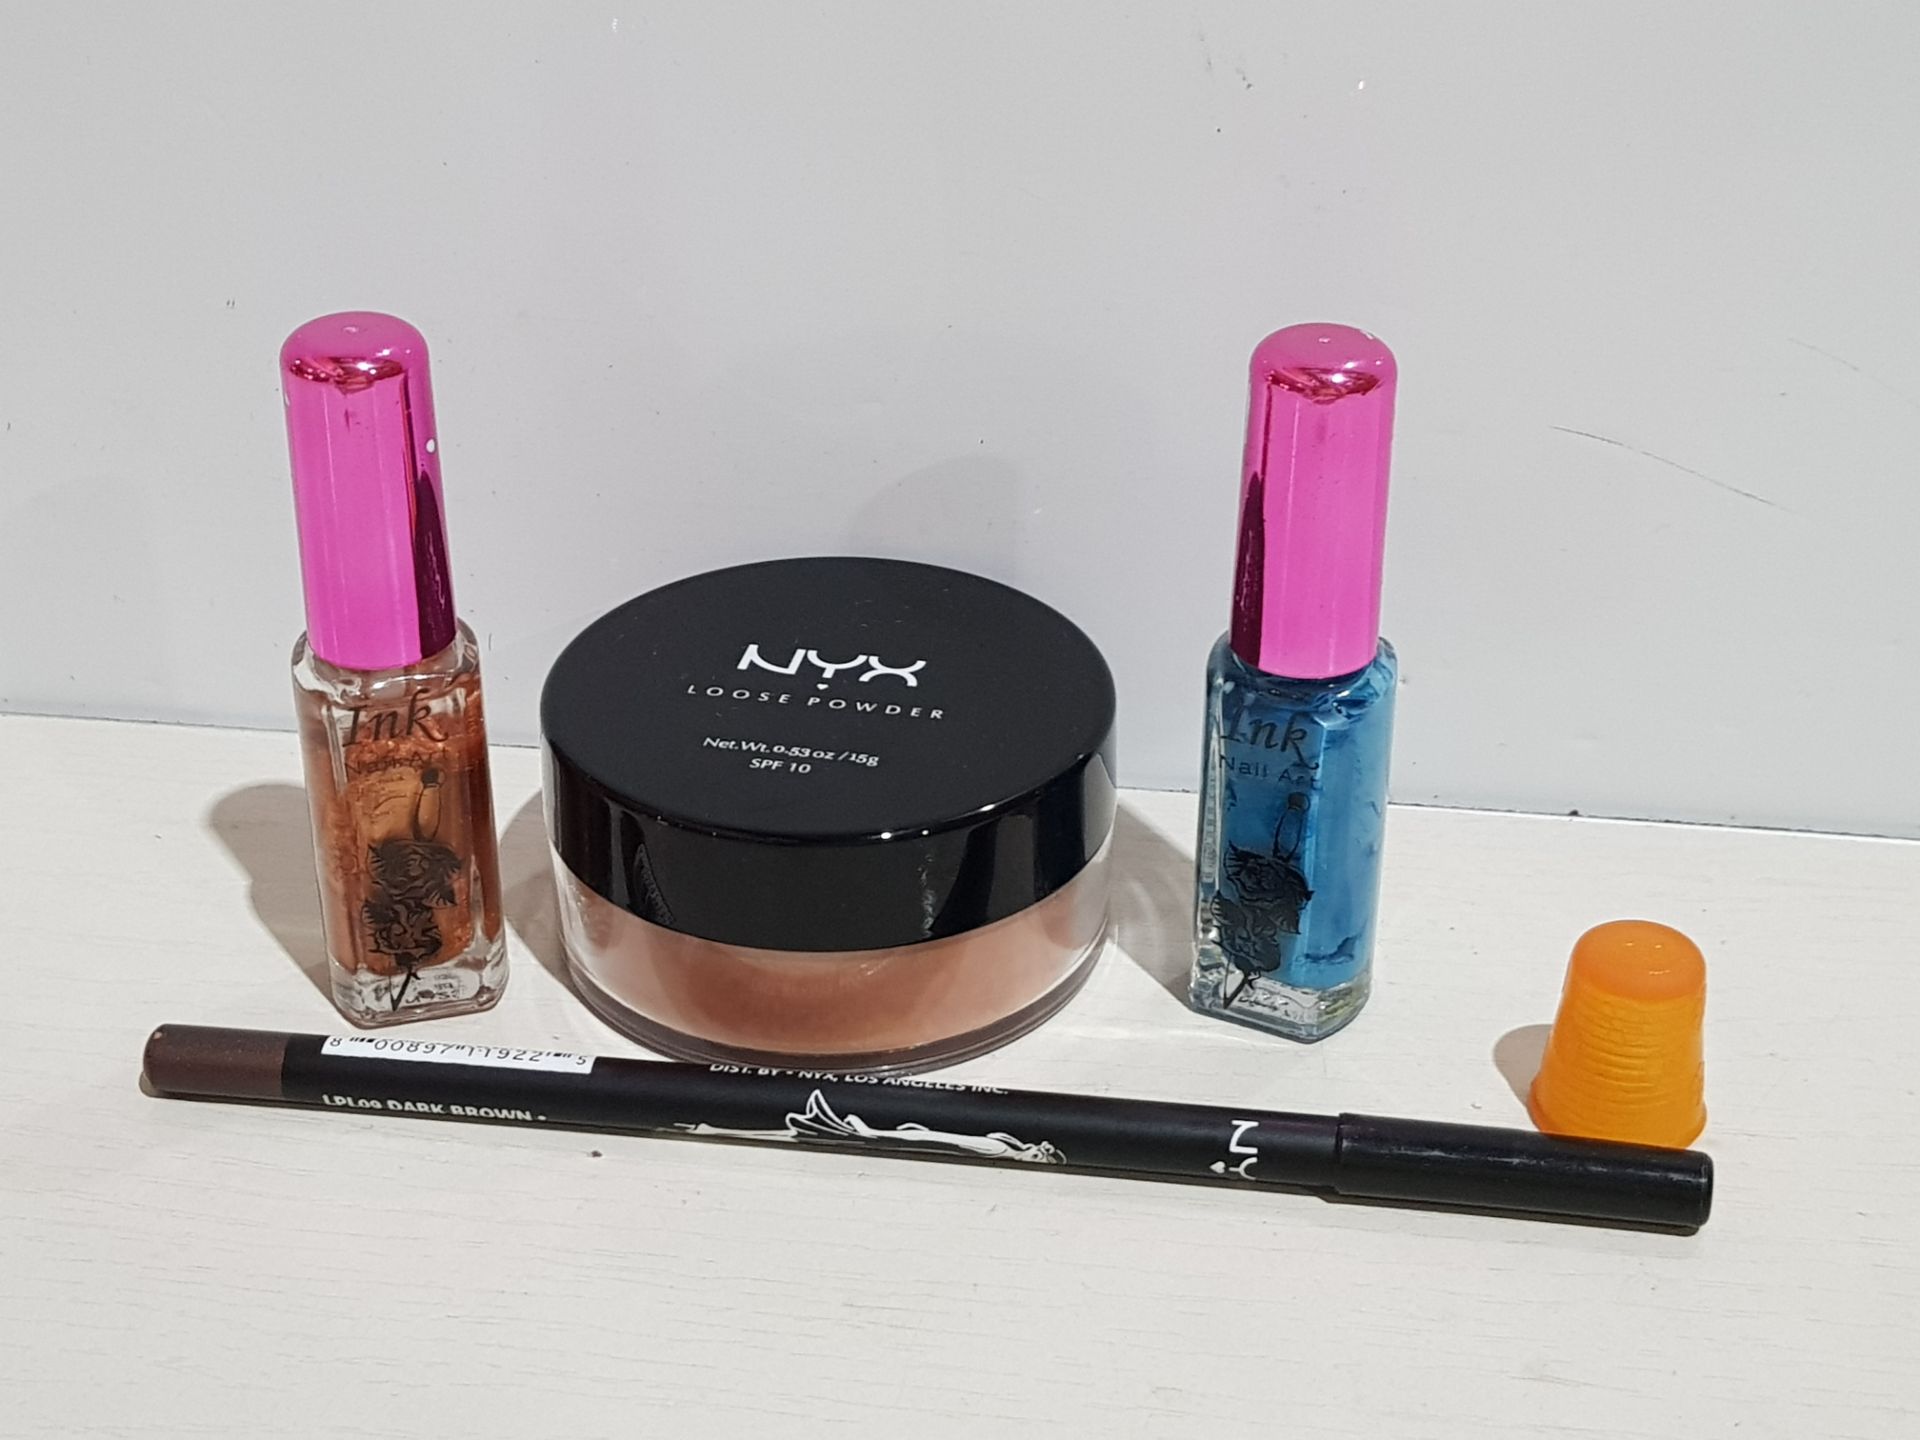 100+ PIECE MIXED COSMETICS LOT TO INCLUDE NYX GODDESS SHIMMER LFP 05 LOOSE POWDER, INK BLUE AND GOLD